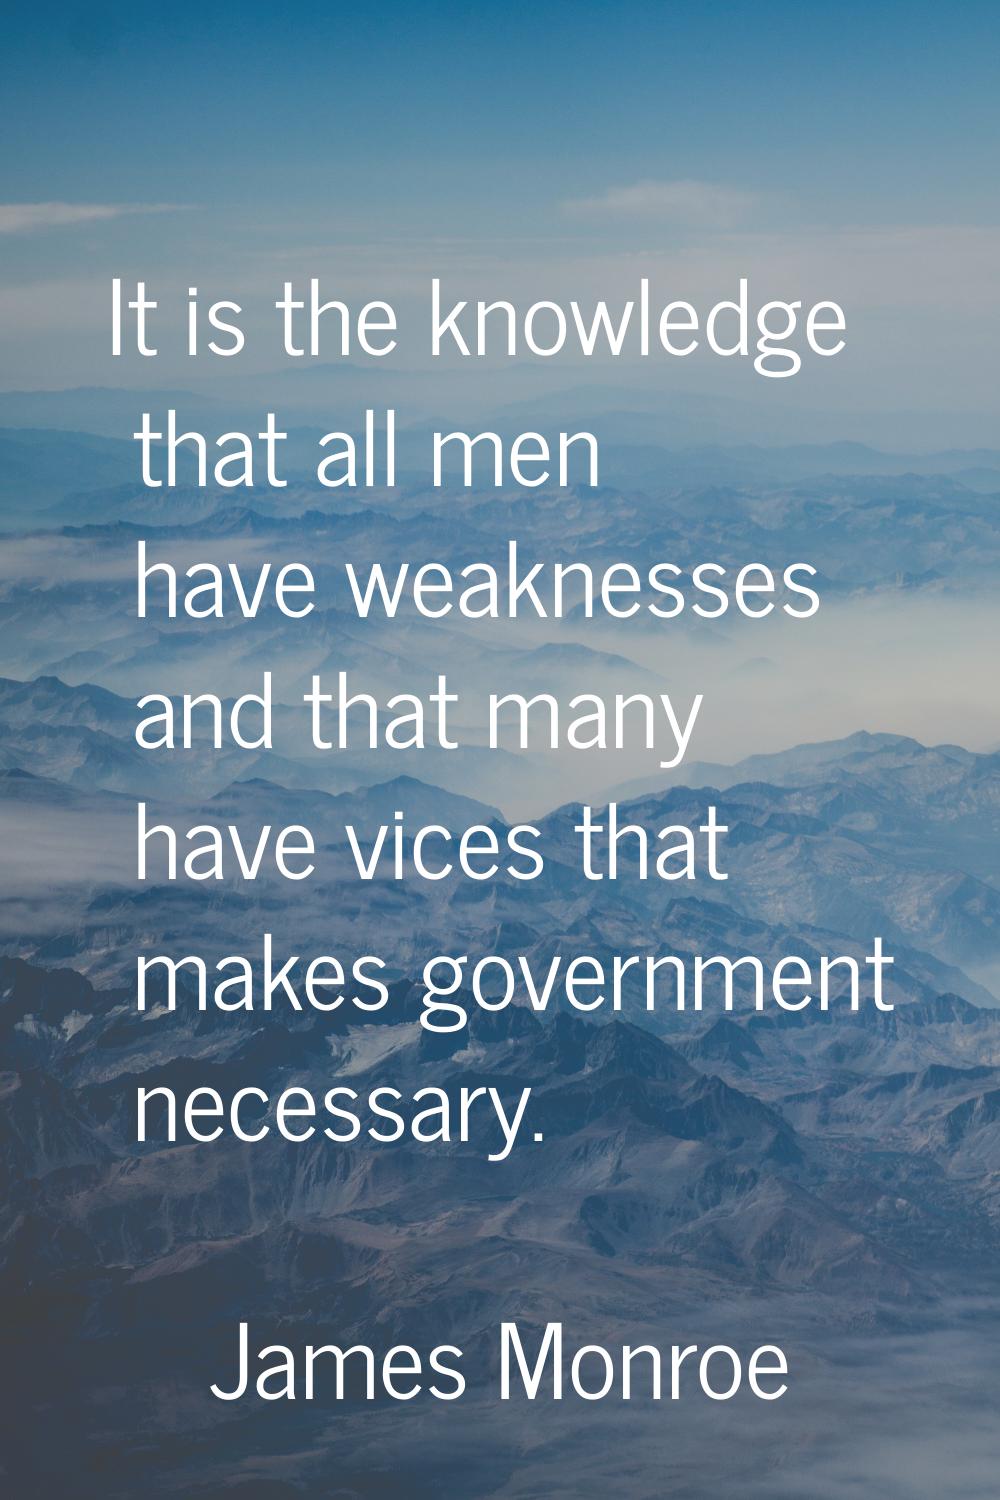 It is the knowledge that all men have weaknesses and that many have vices that makes government nec